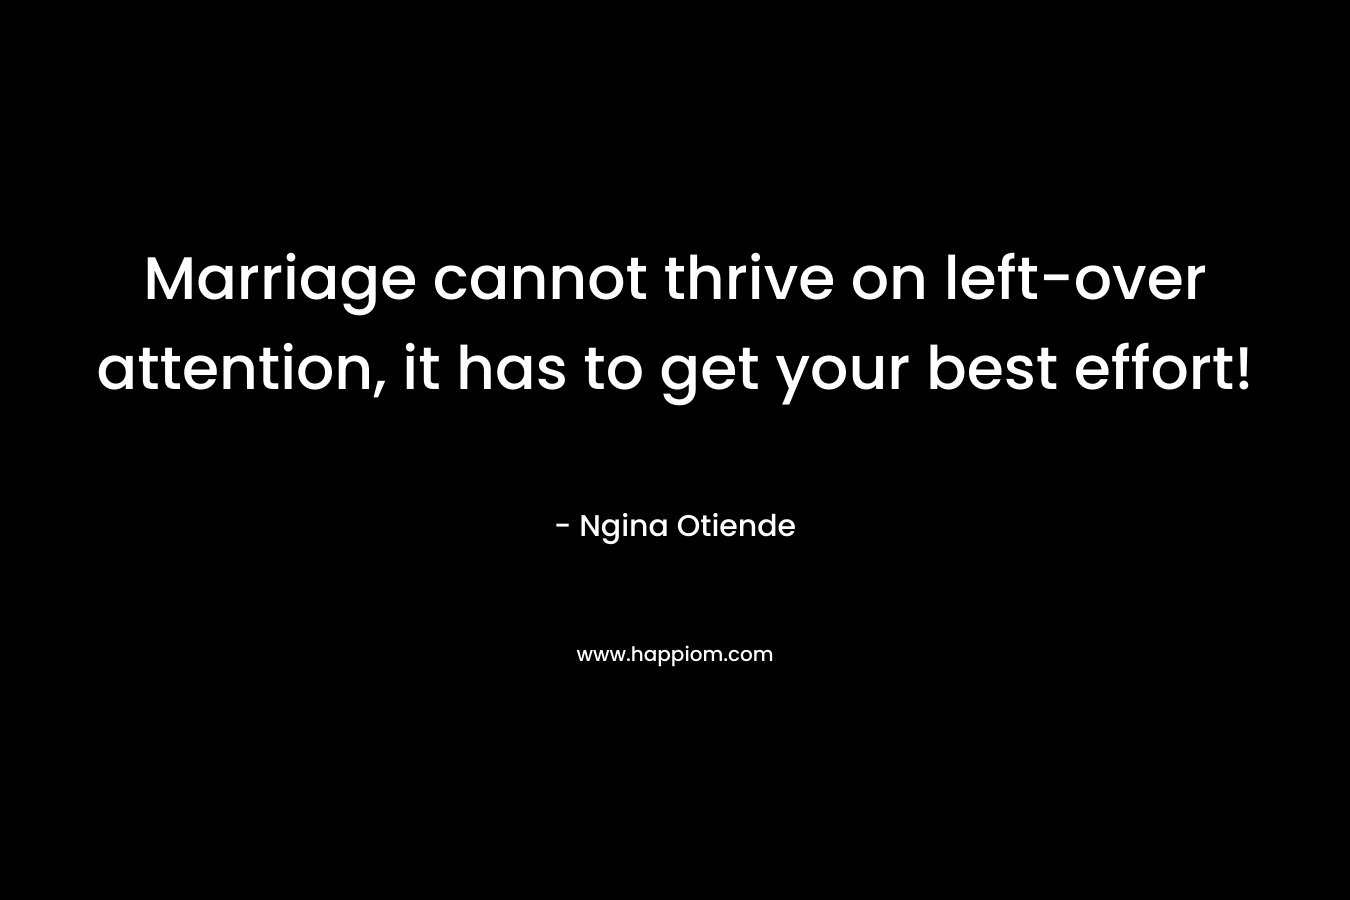 Marriage cannot thrive on left-over attention, it has to get your best effort! – Ngina Otiende